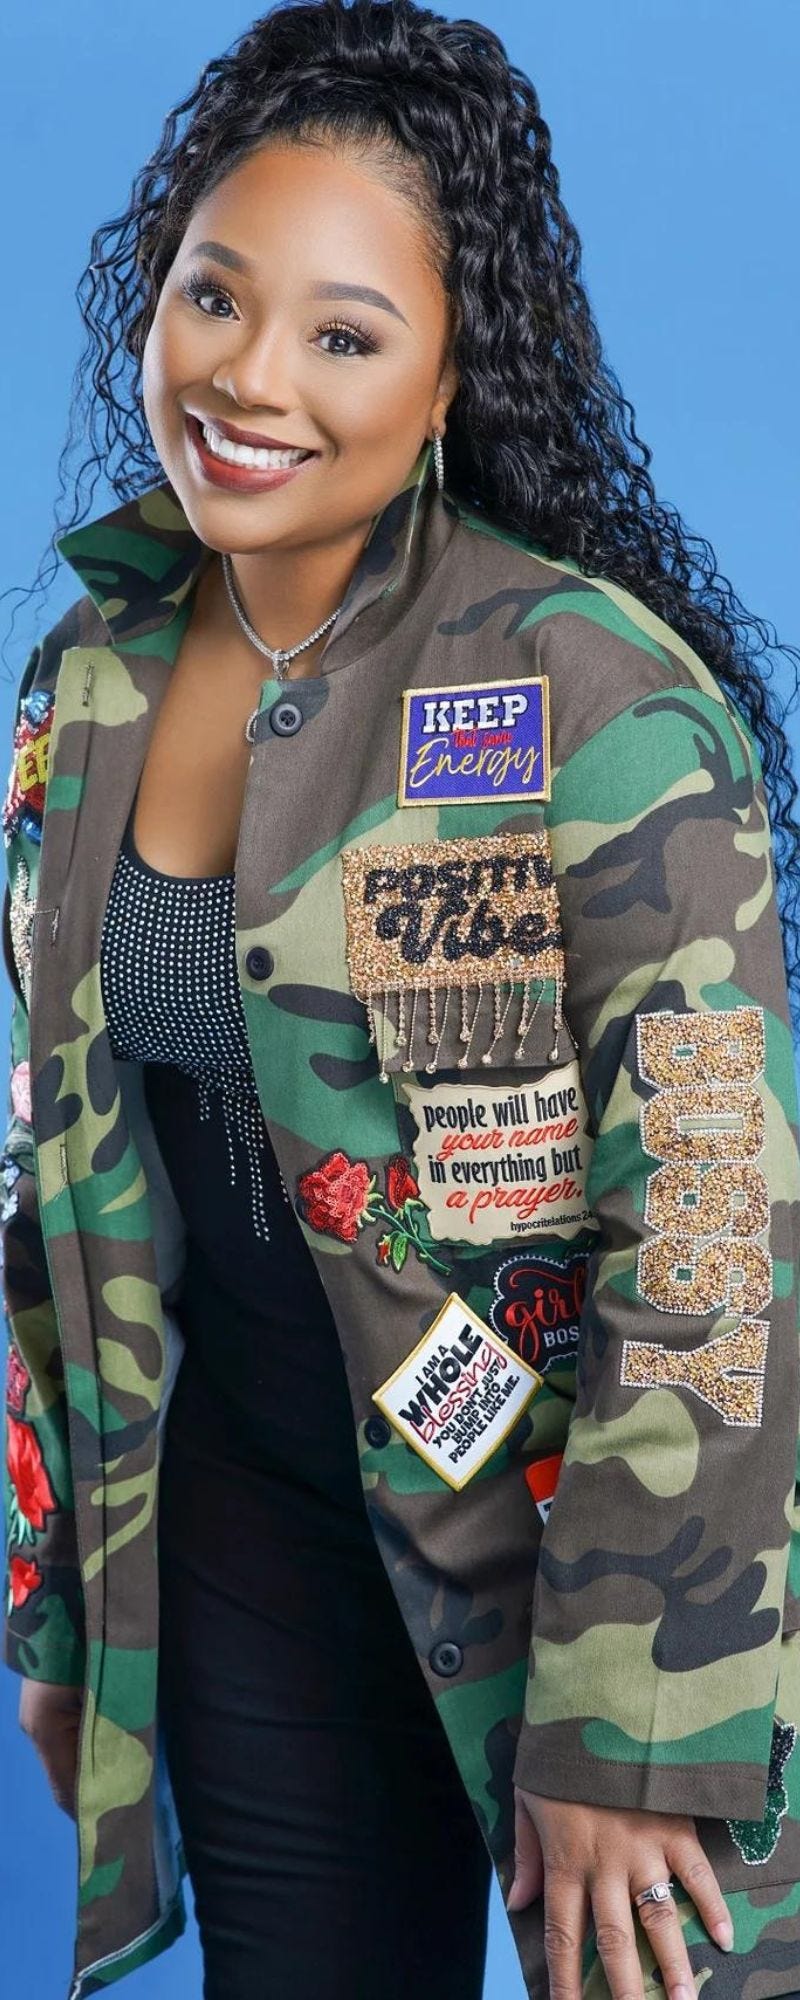 Transform Your Look With the Camo Jacket with Patches Trend - kicnyc ...